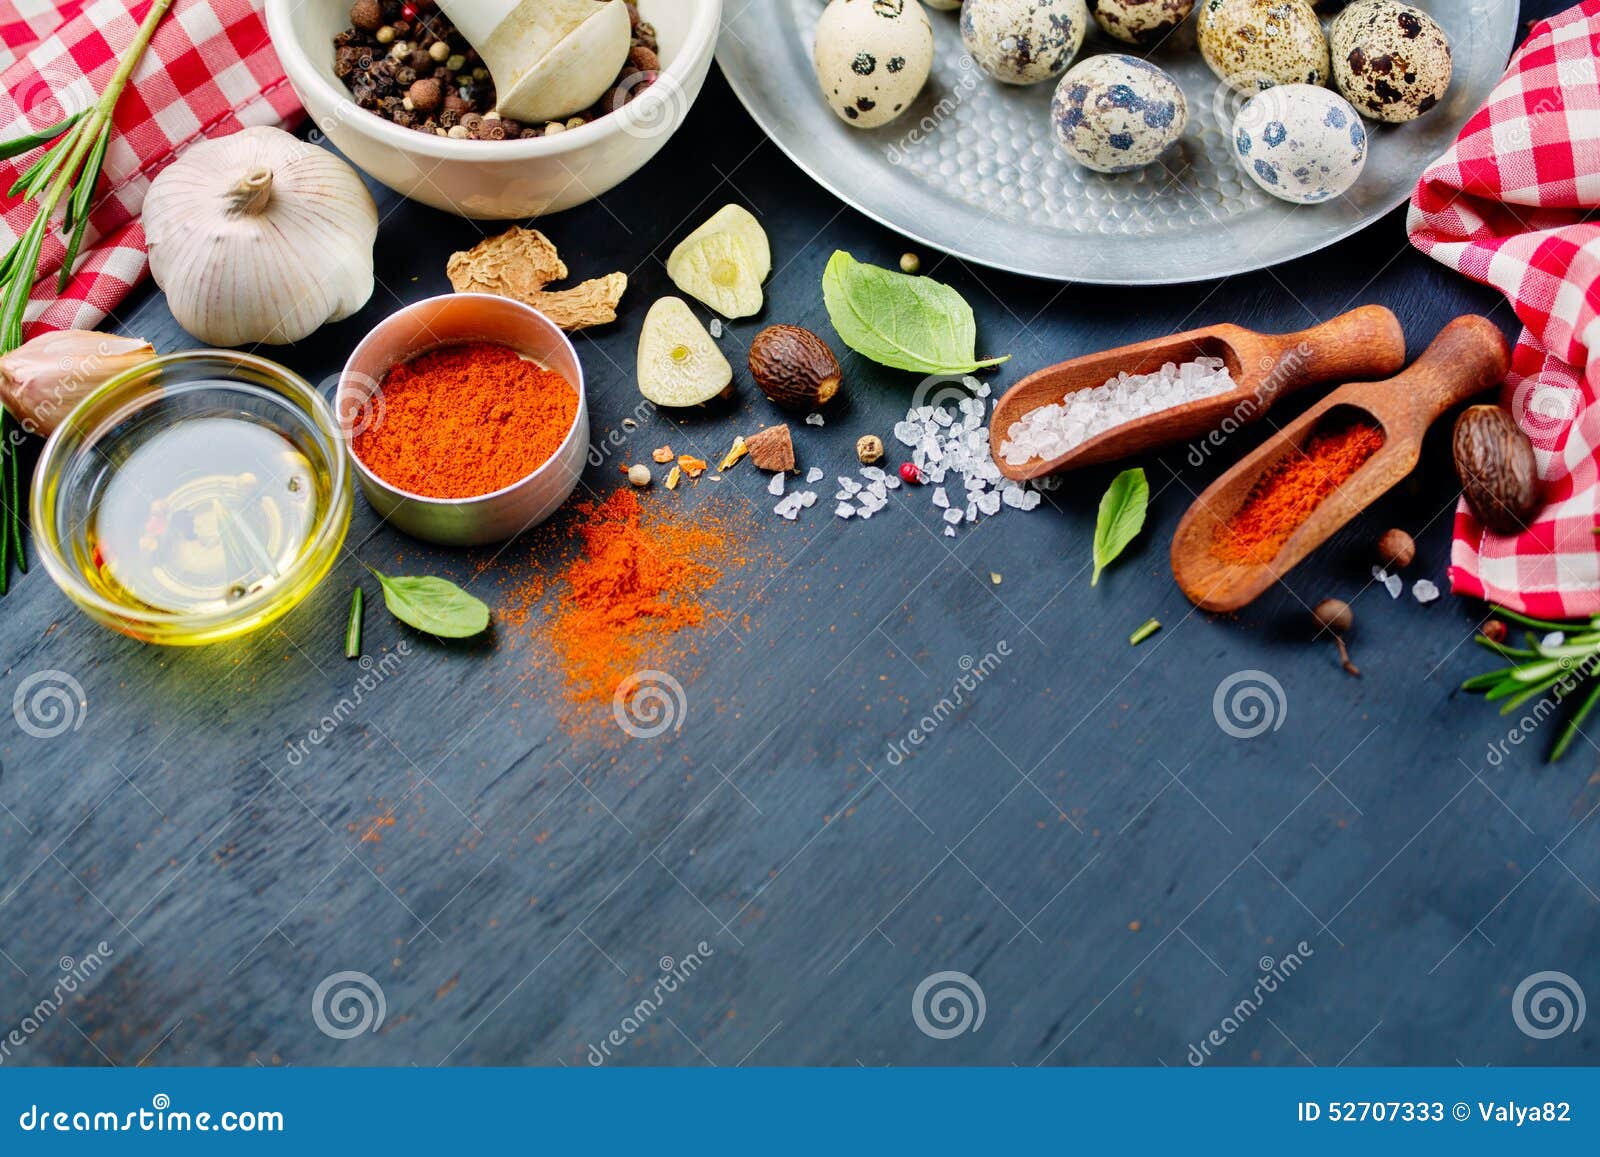 Ingredients for cooking stock image. Image of eating - 52707333